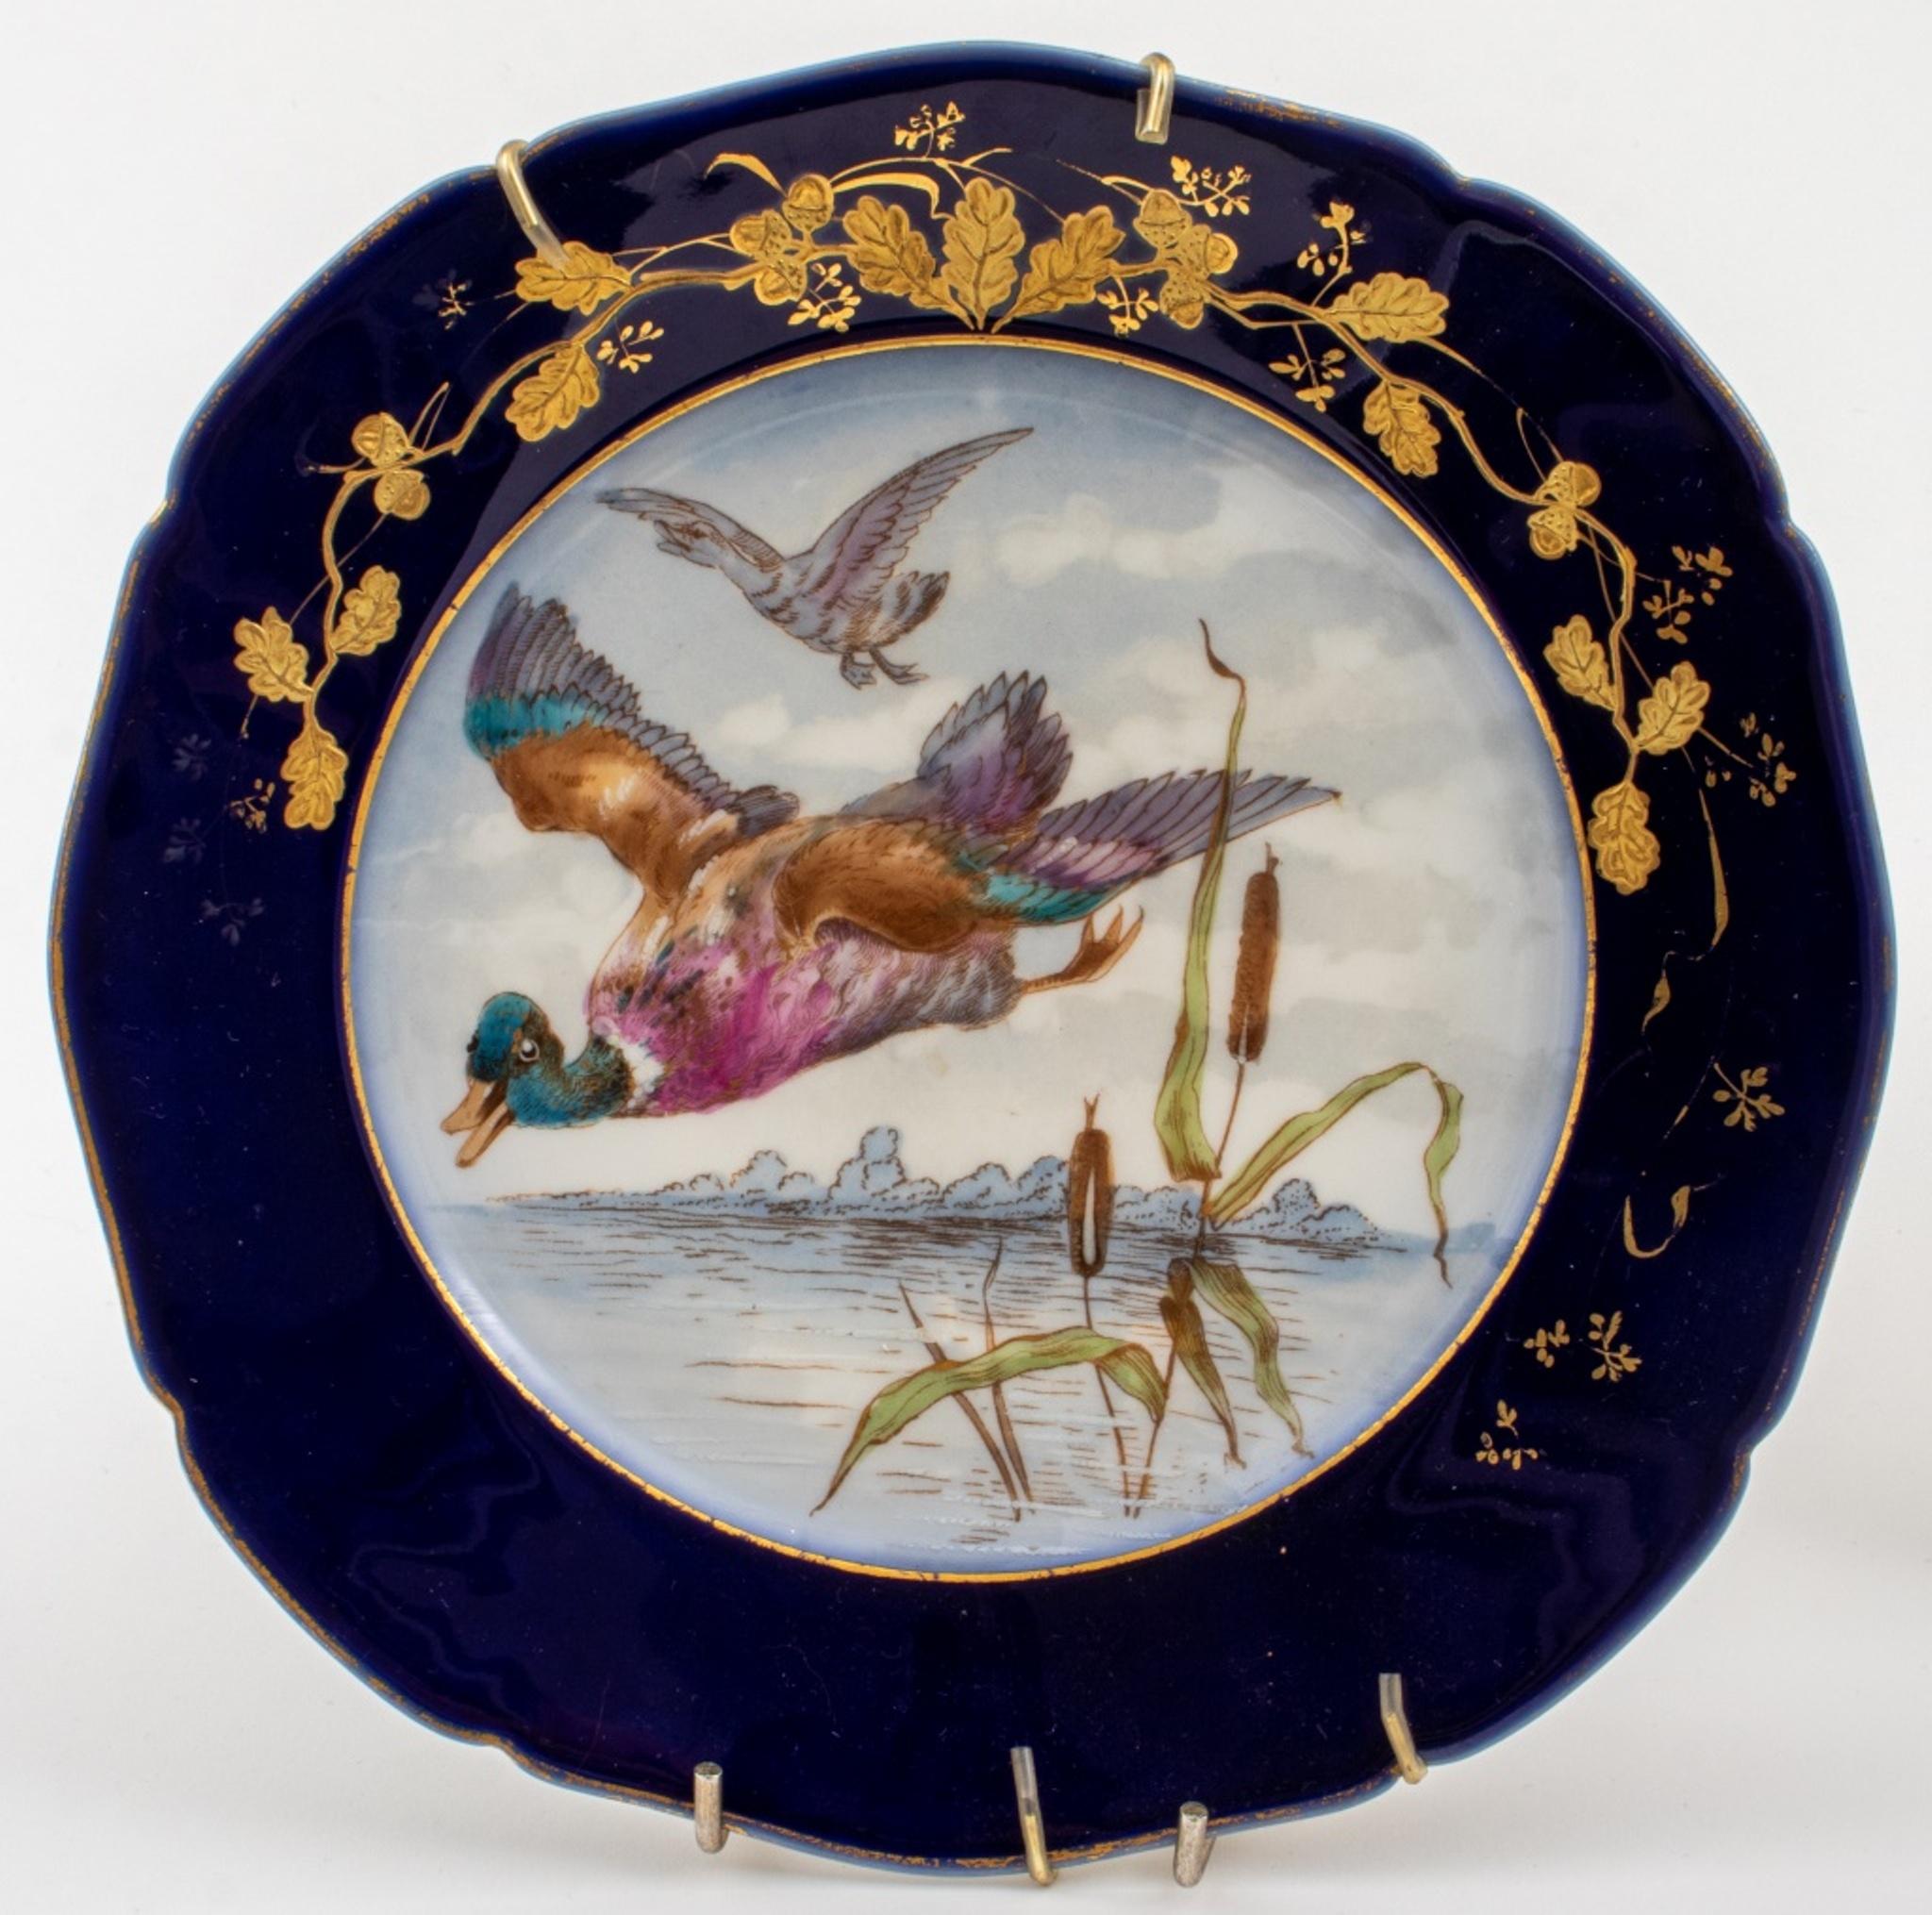 Seven pieces of Limoges ceramic porcelain comprising six plates hand-painted with hunting game including birds, ducks, boars, and rabbits and one service tray with a central vignette of two dogs chasing a stag deer, all with gilt foliate borders on